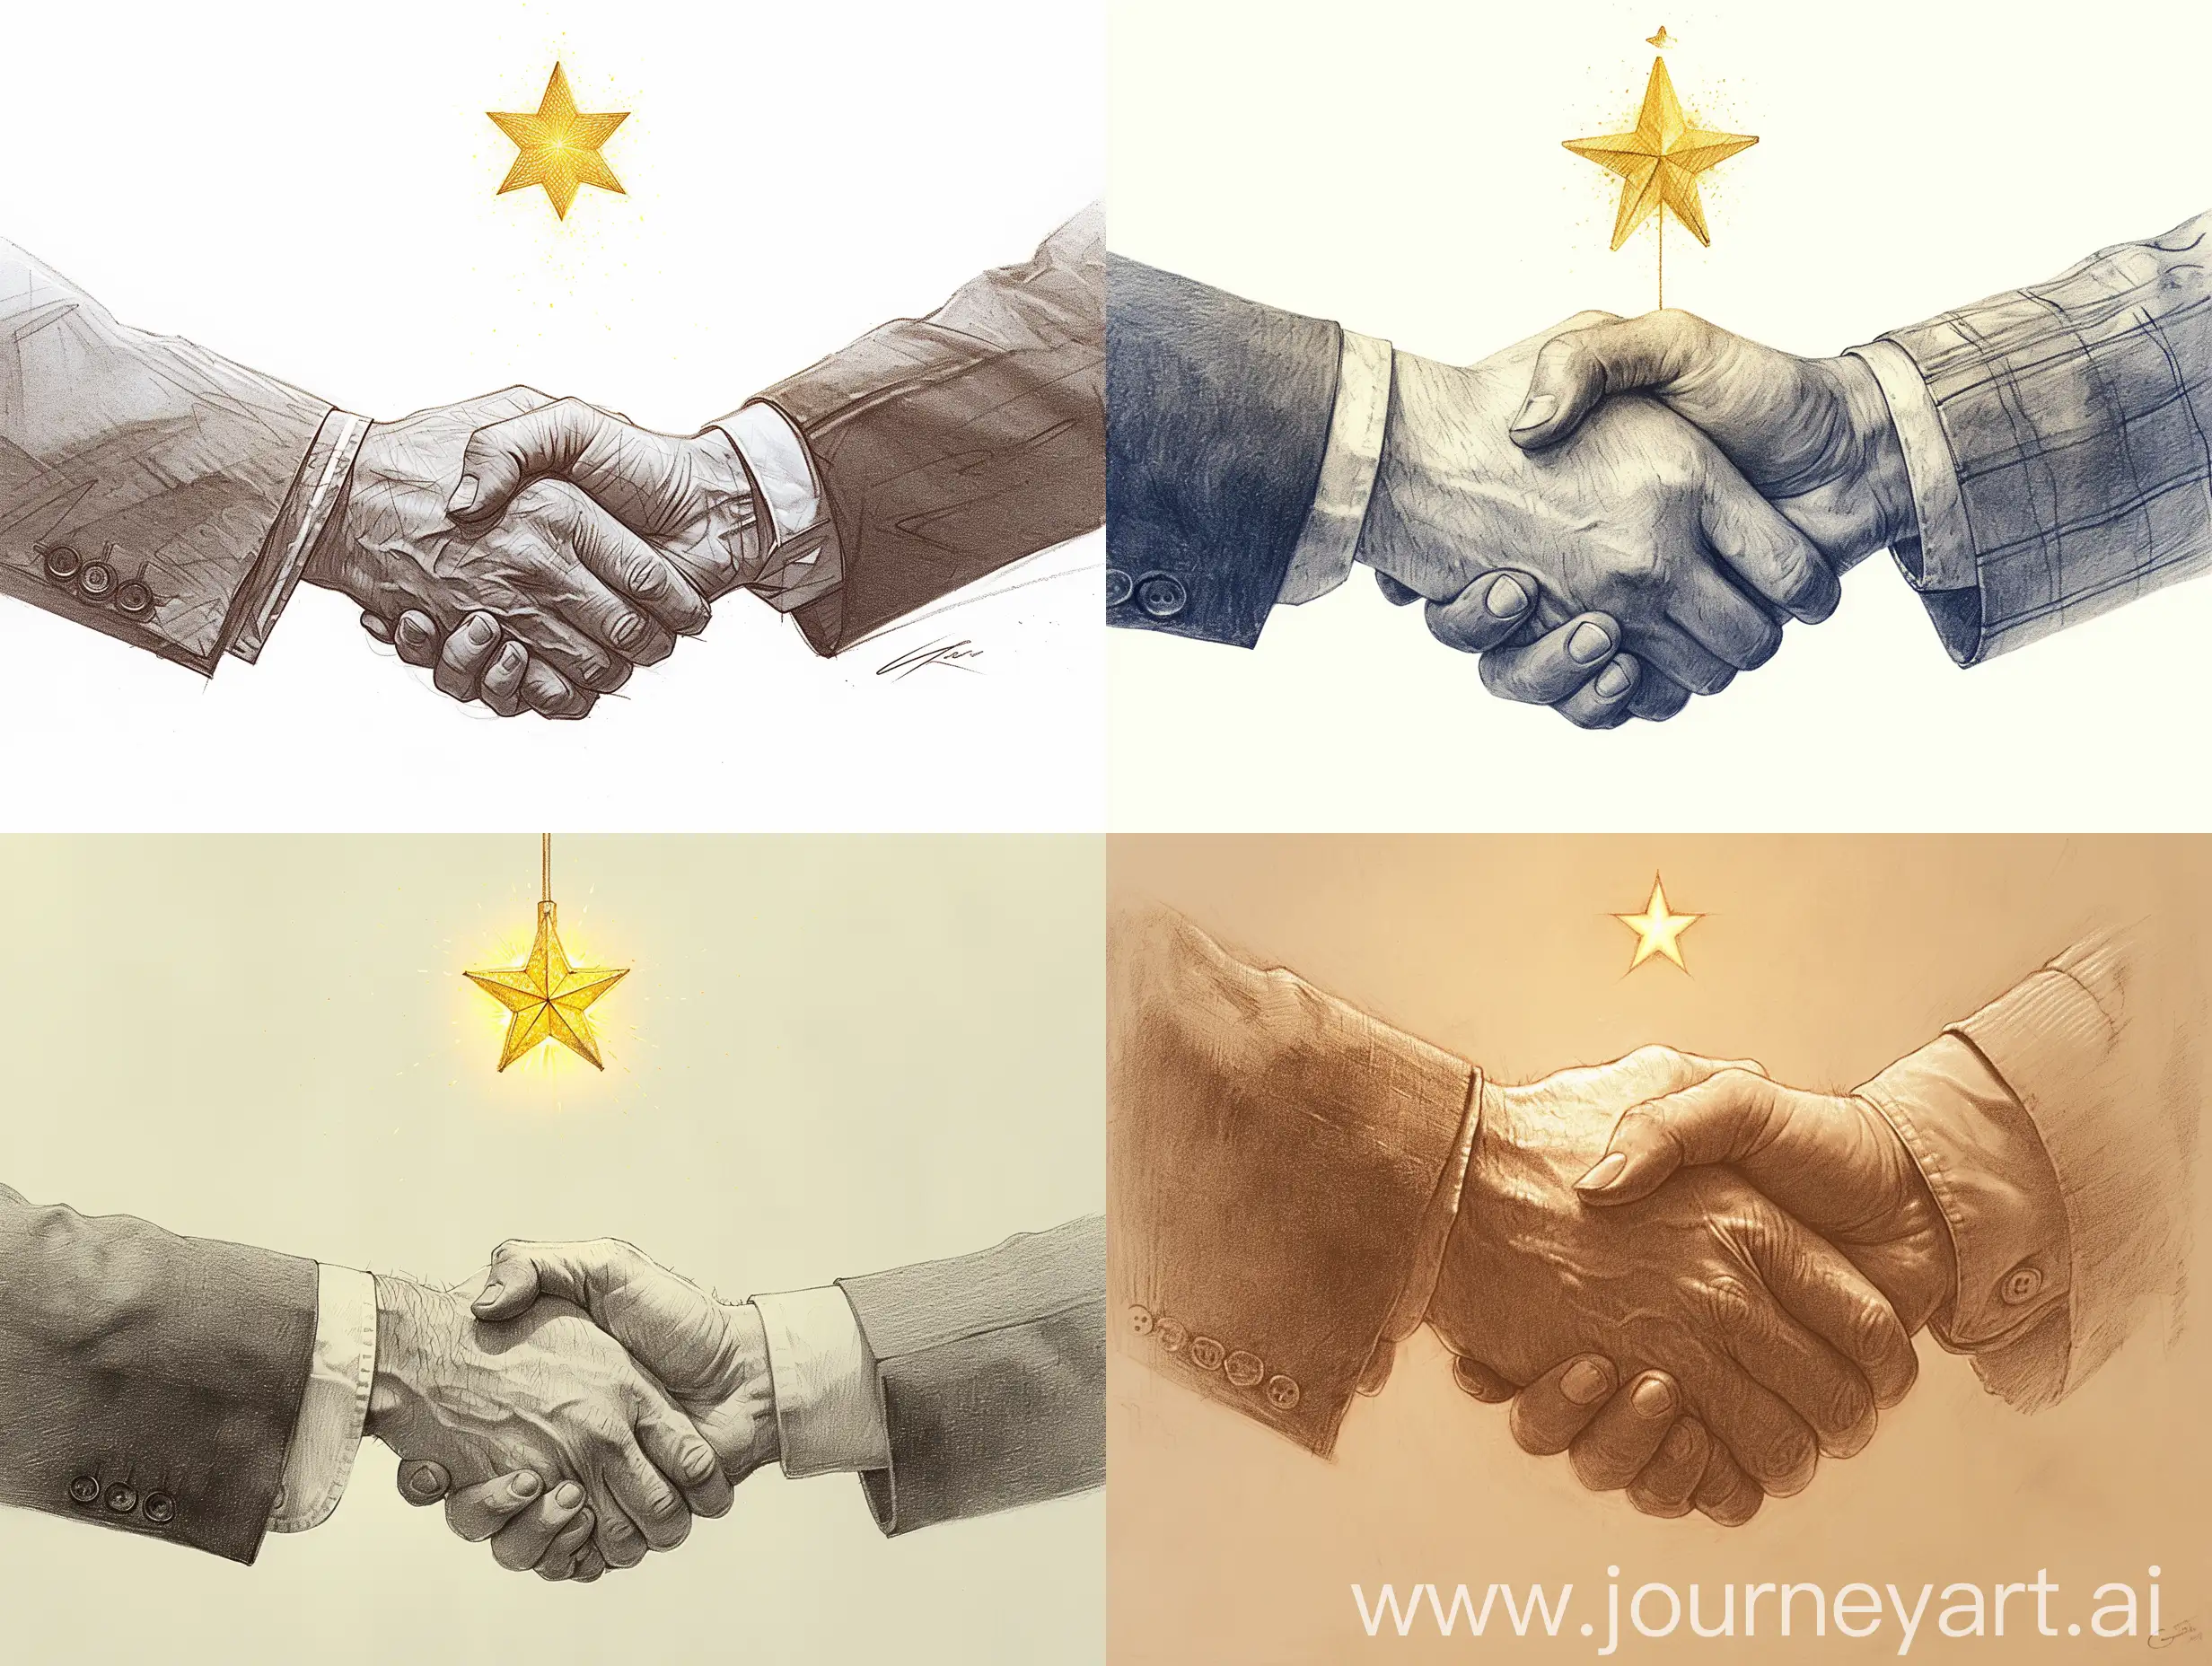 Satisfactory-Handshake-Detailed-Monochrome-Pencil-Drawing-with-Glowing-Yellow-Star